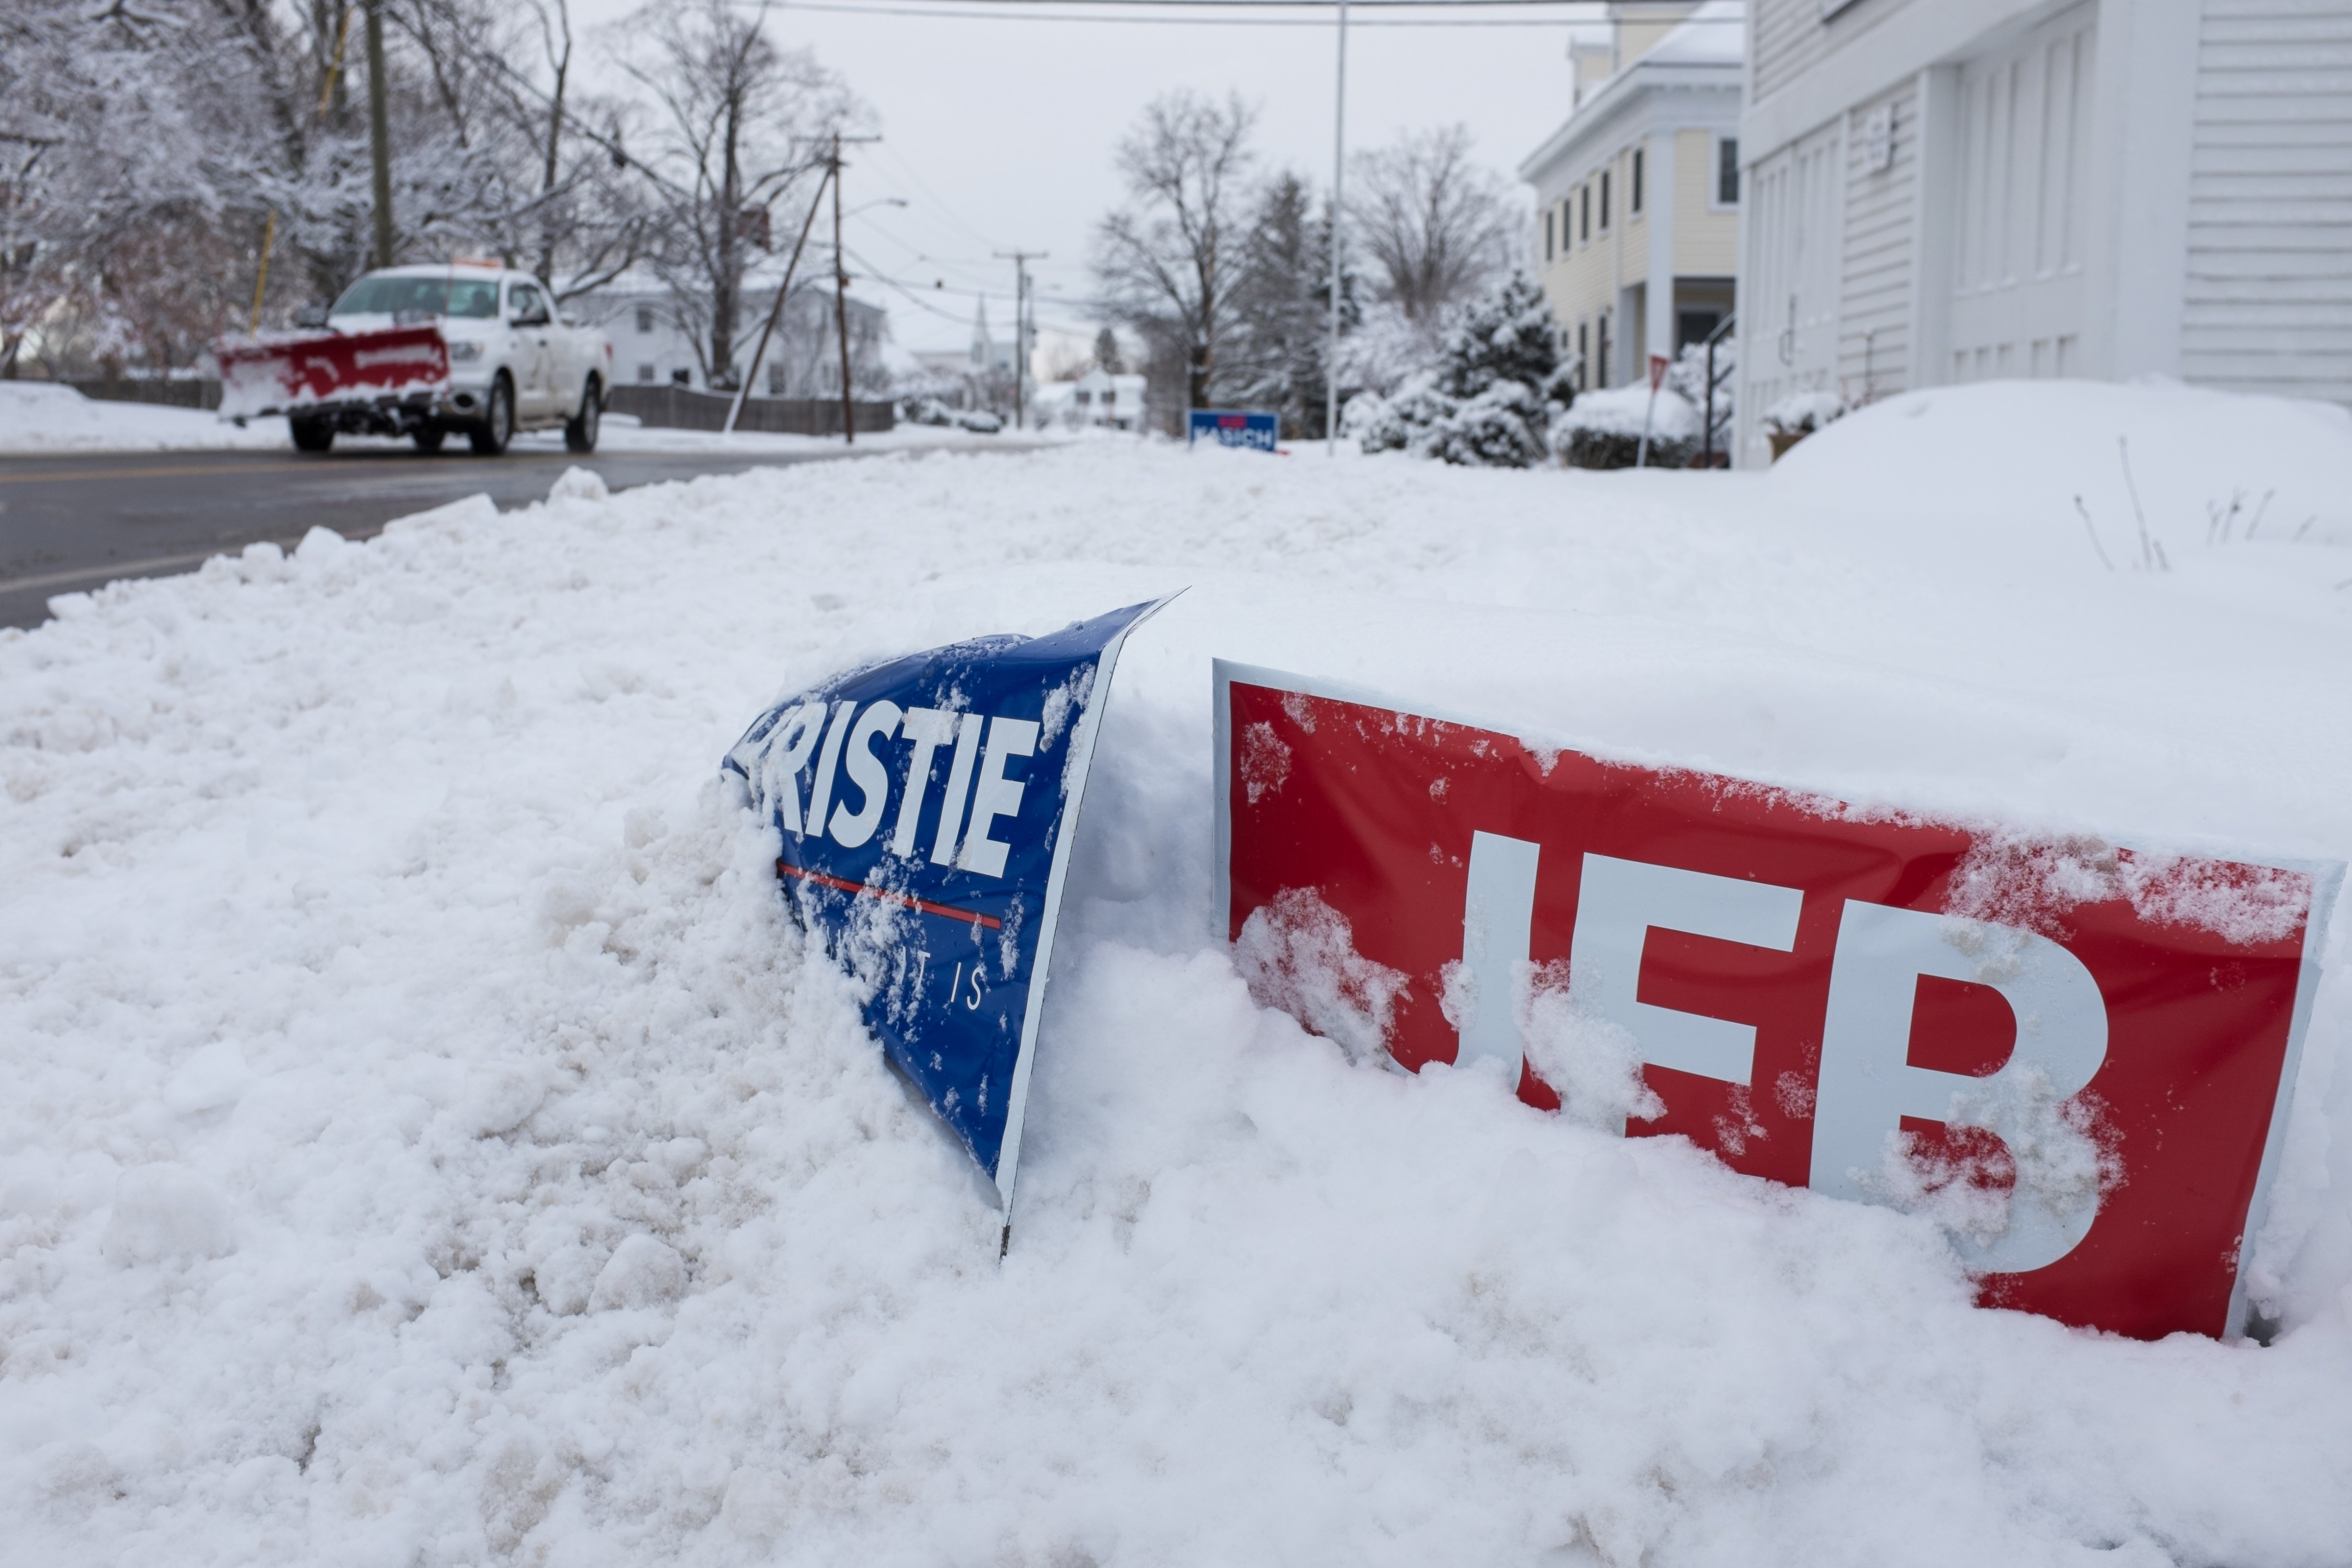 Political signs buried in snow are seen on Feb. 5, 2016 in Hollis, New Hampshire. (Matthew Cavanaugh—Getty Images)